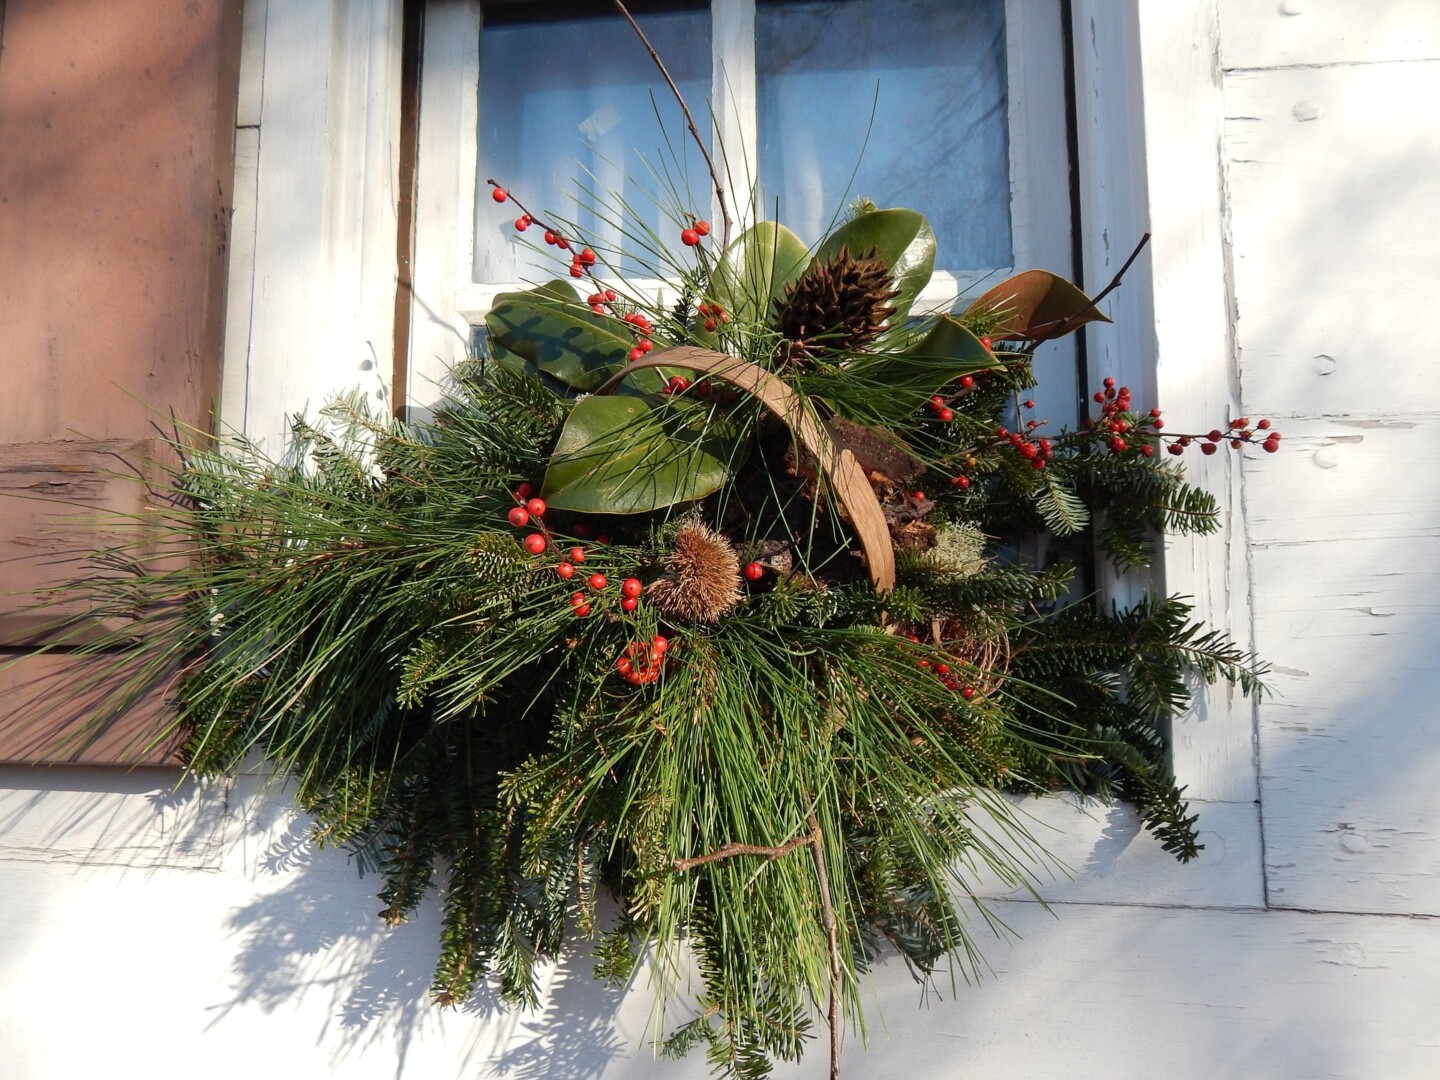 Now is the time to gather evergreen clippings for your holiday decorations